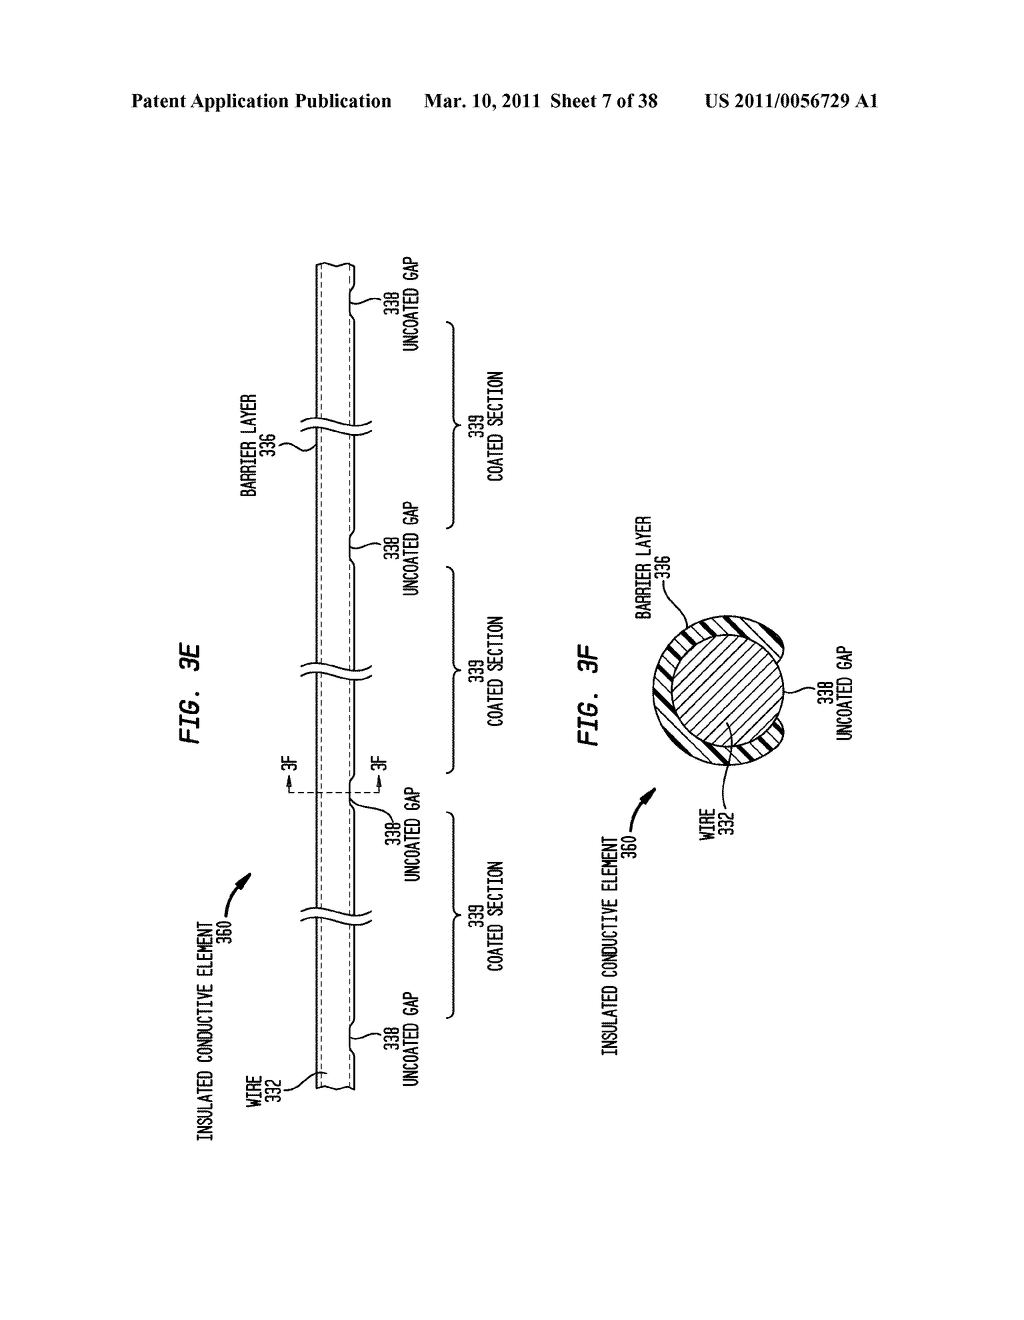 INSULATED CONDUCTIVE ELEMENT HAVING A SUBSTANTIALLY CONTINUOUS BARRIER LAYER FORMED THROUGH CONTINUOUS VAPOR DEPOSITION - diagram, schematic, and image 08